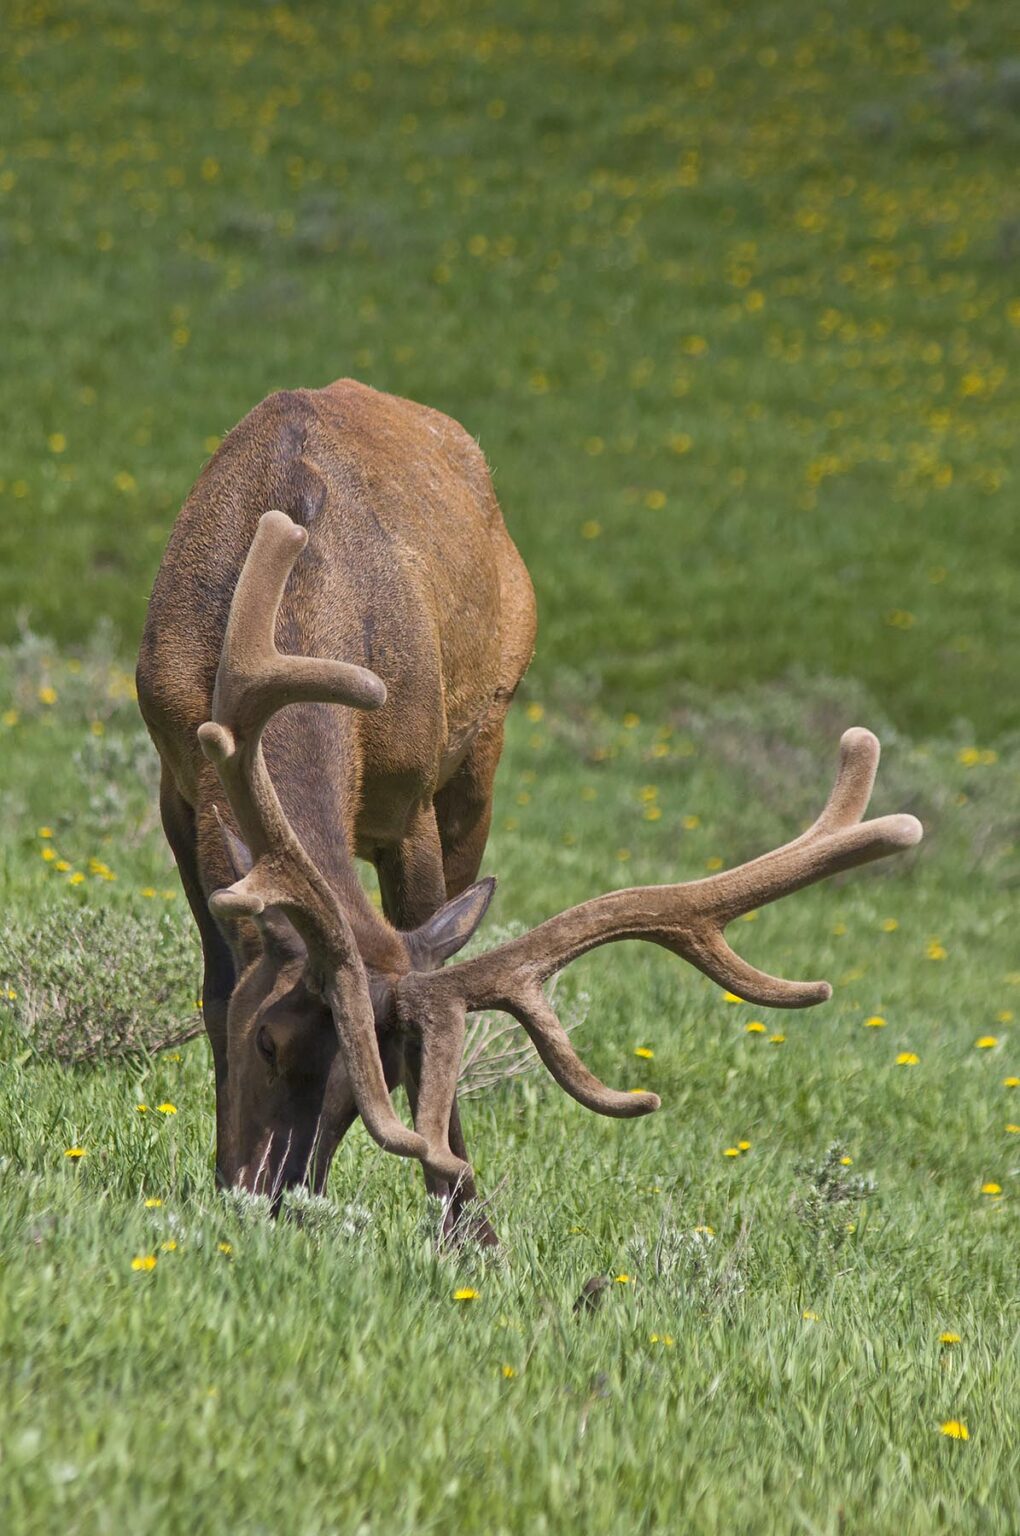 A BULL ELK (Cervus elaphus) graze peacefully in a pasture  - YELLOWSTONE NATIONAL PARK, WYOMING